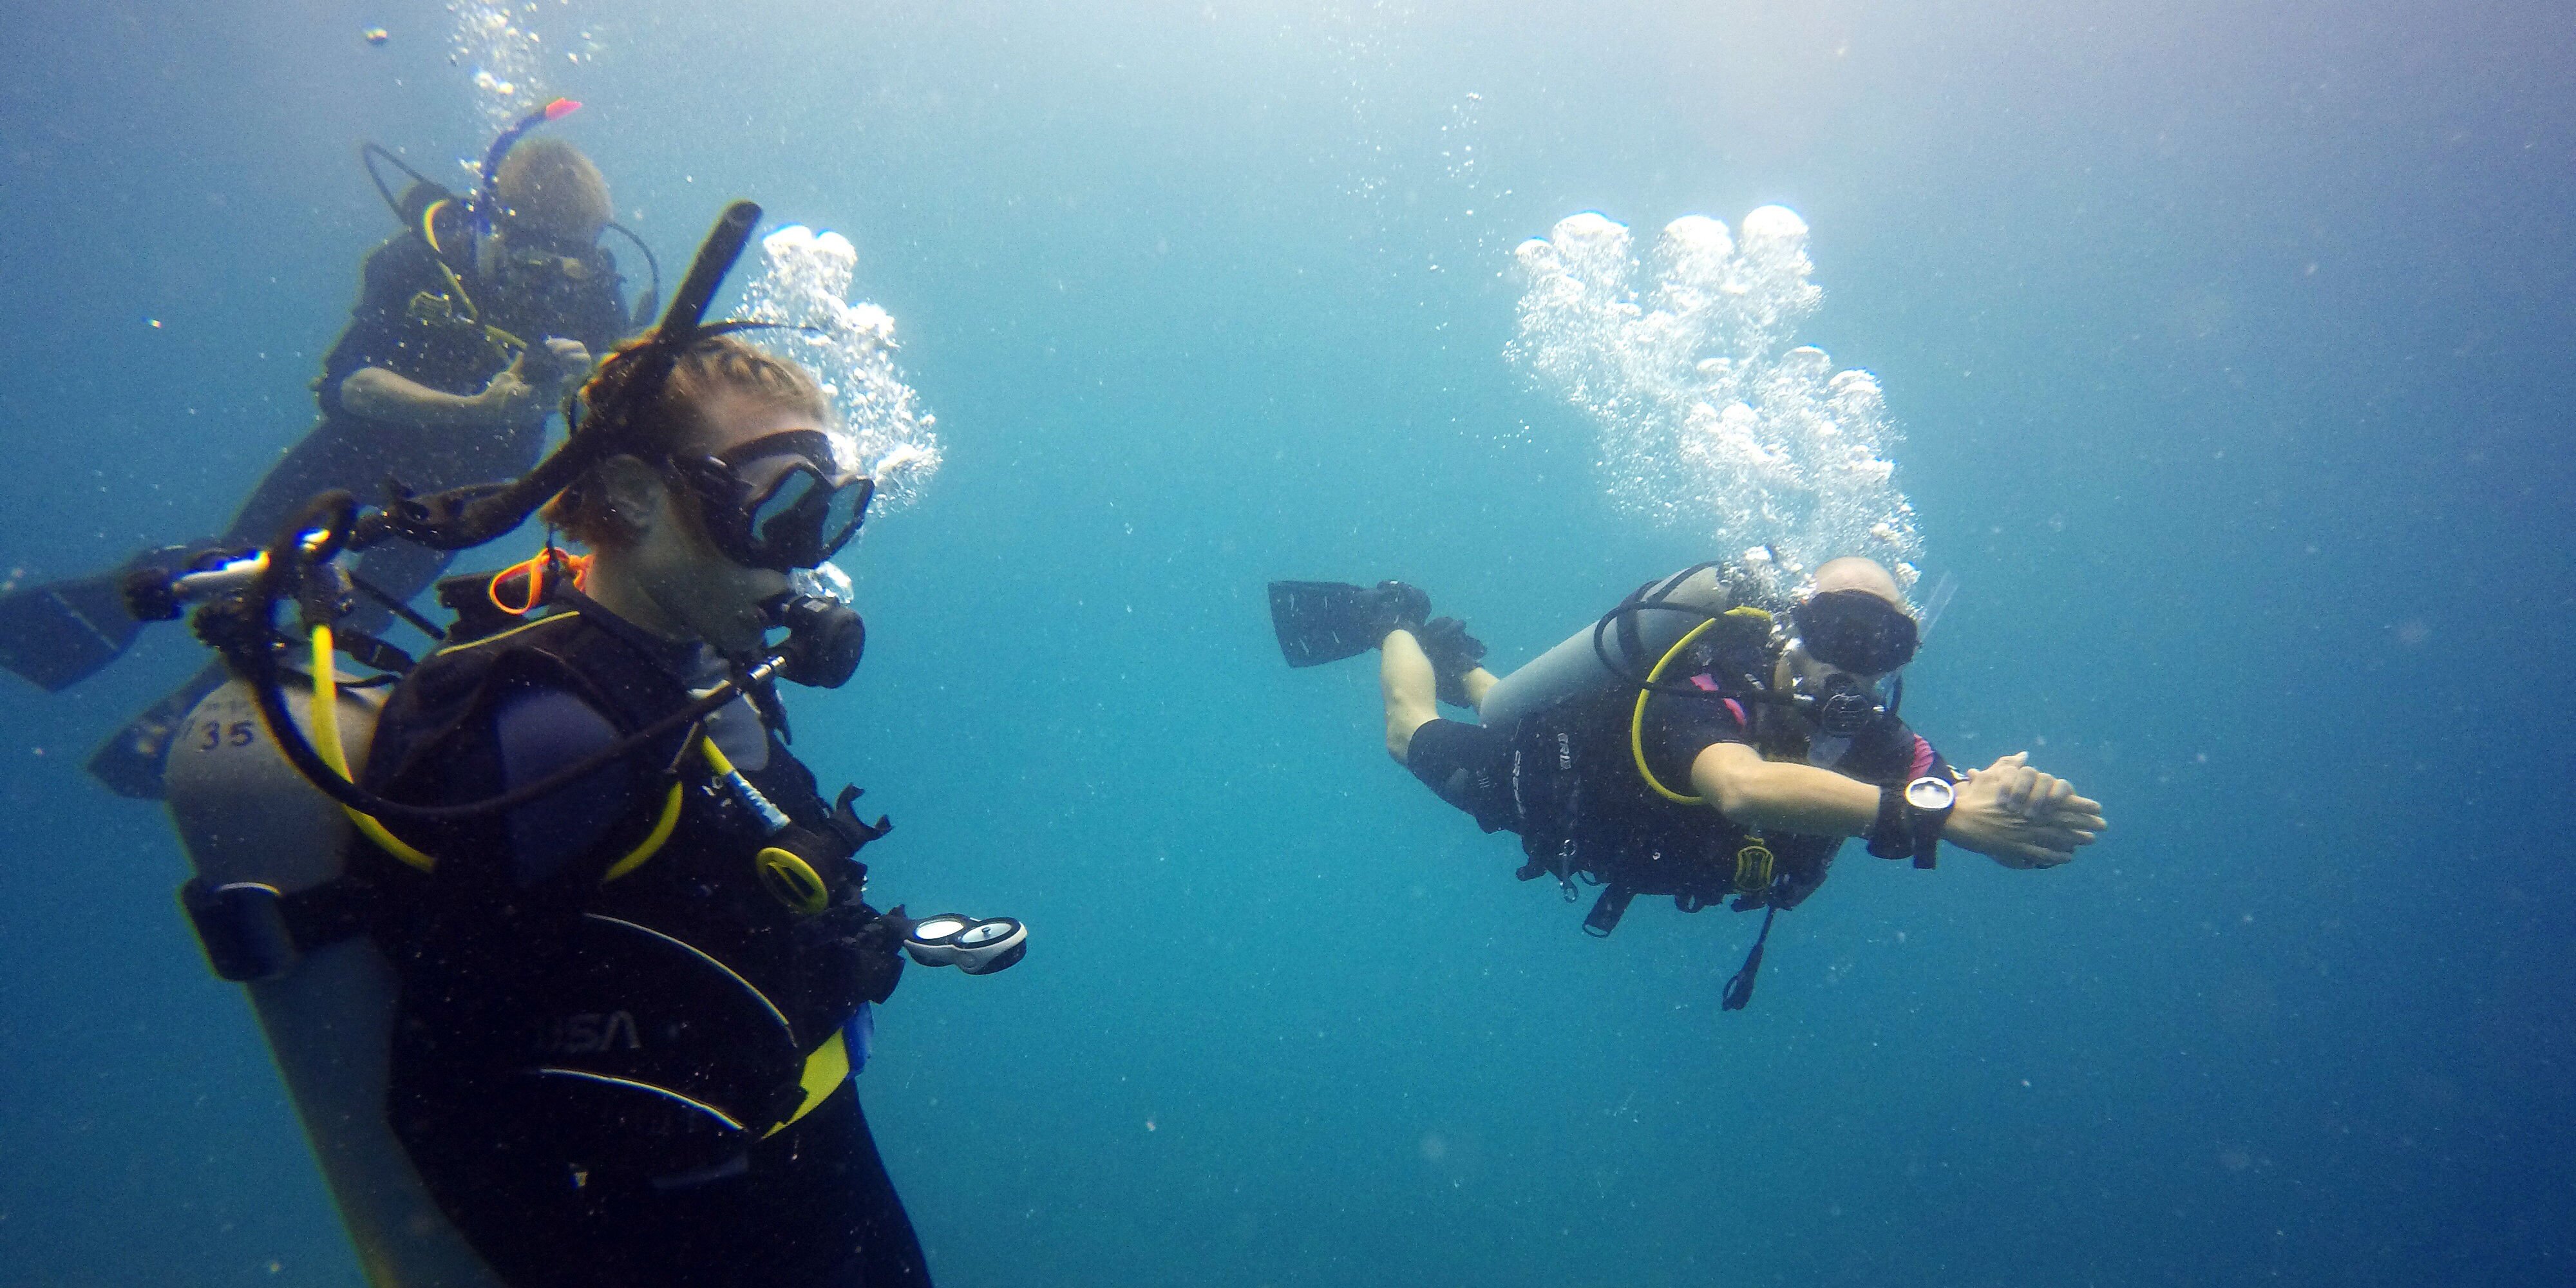 These participants complete data collection dives while on marine conservation programs with GVI.